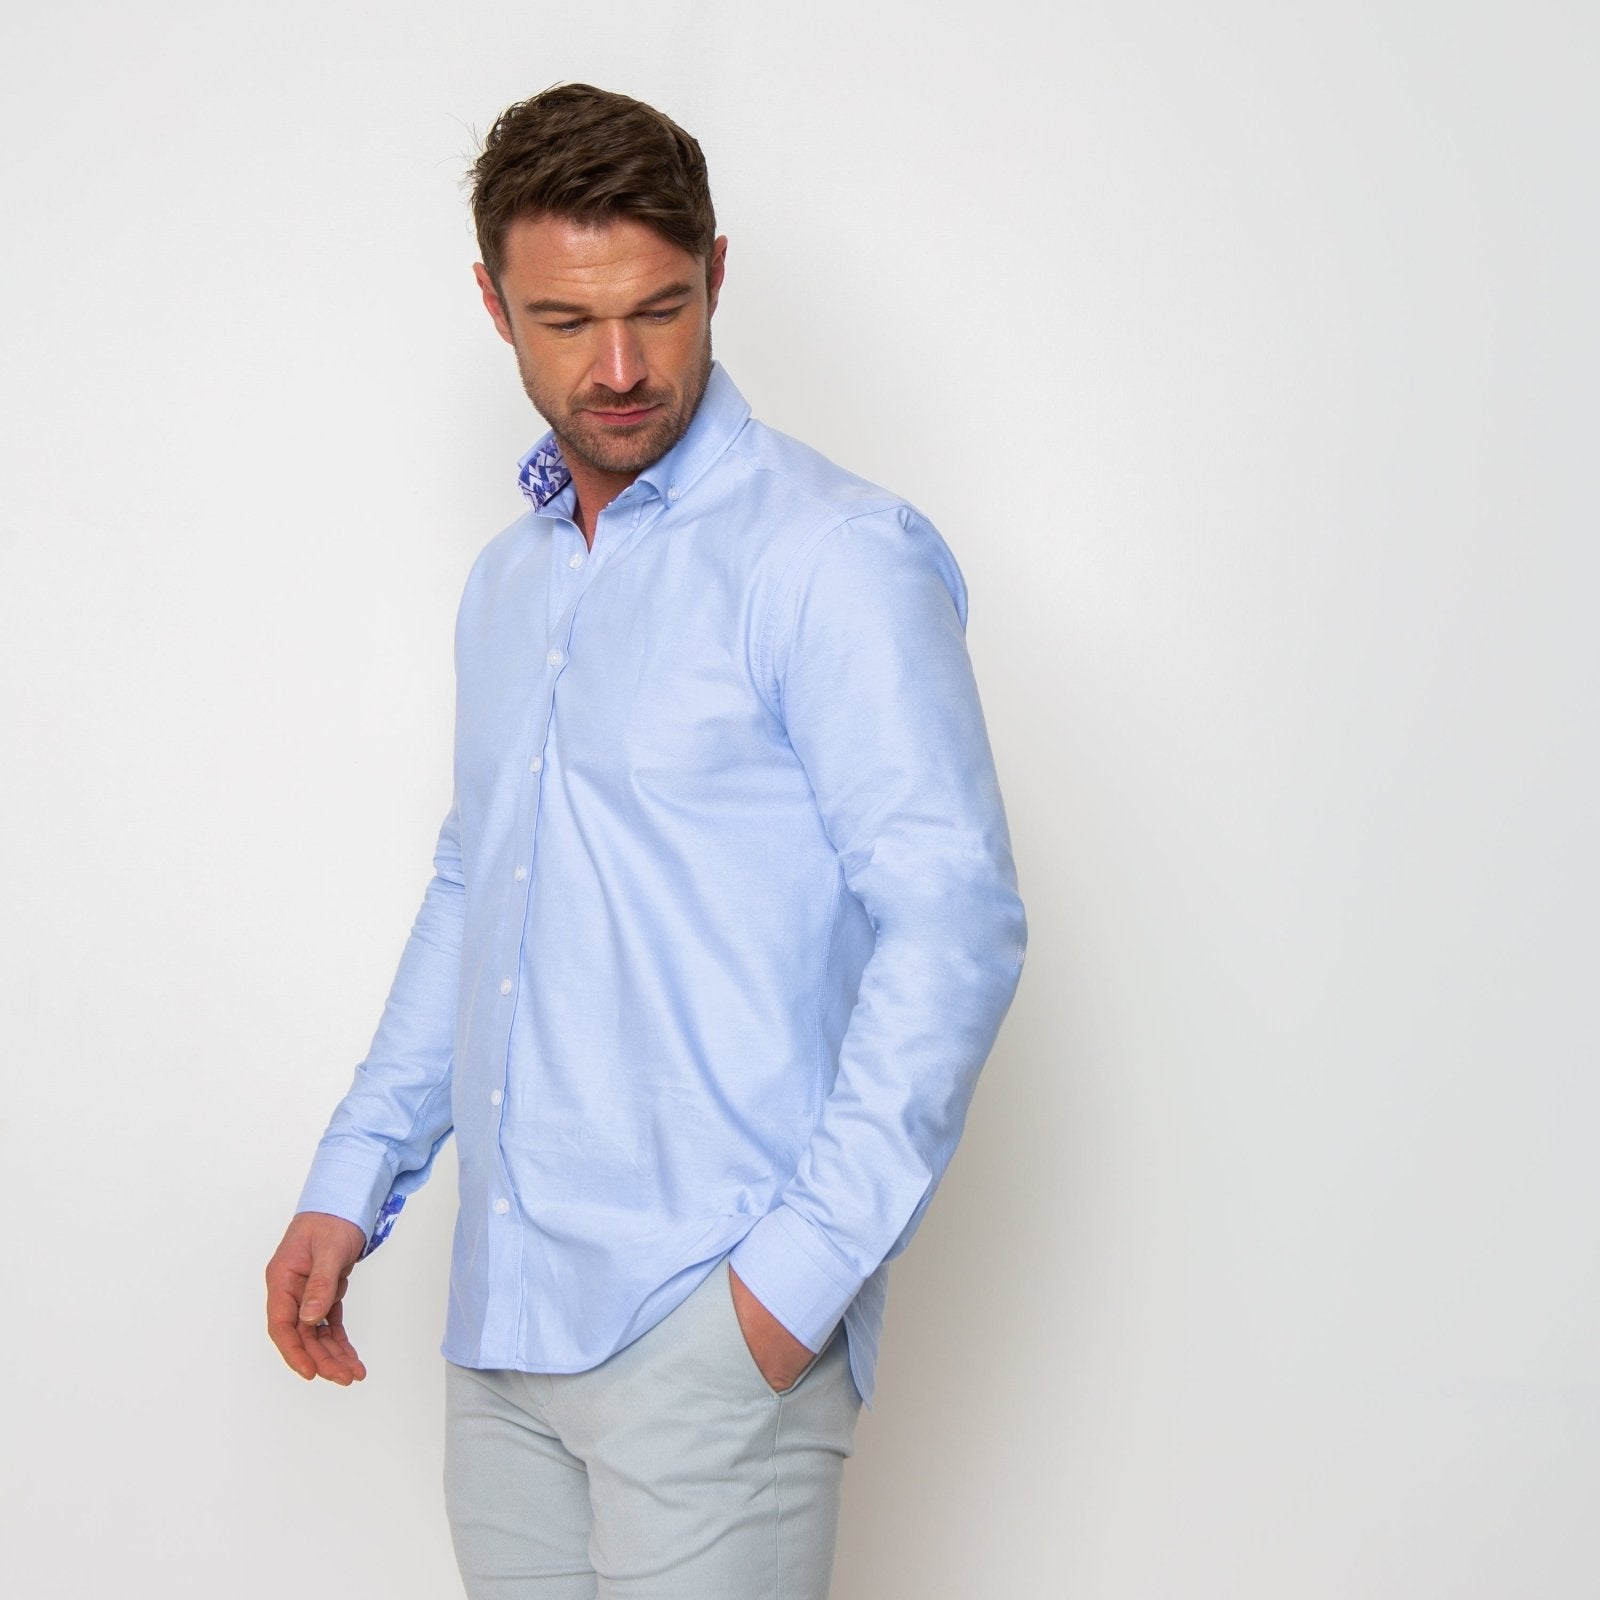 Blue Oxford with Shattered Shards Accents Button - Down Shirt - Blake Mill